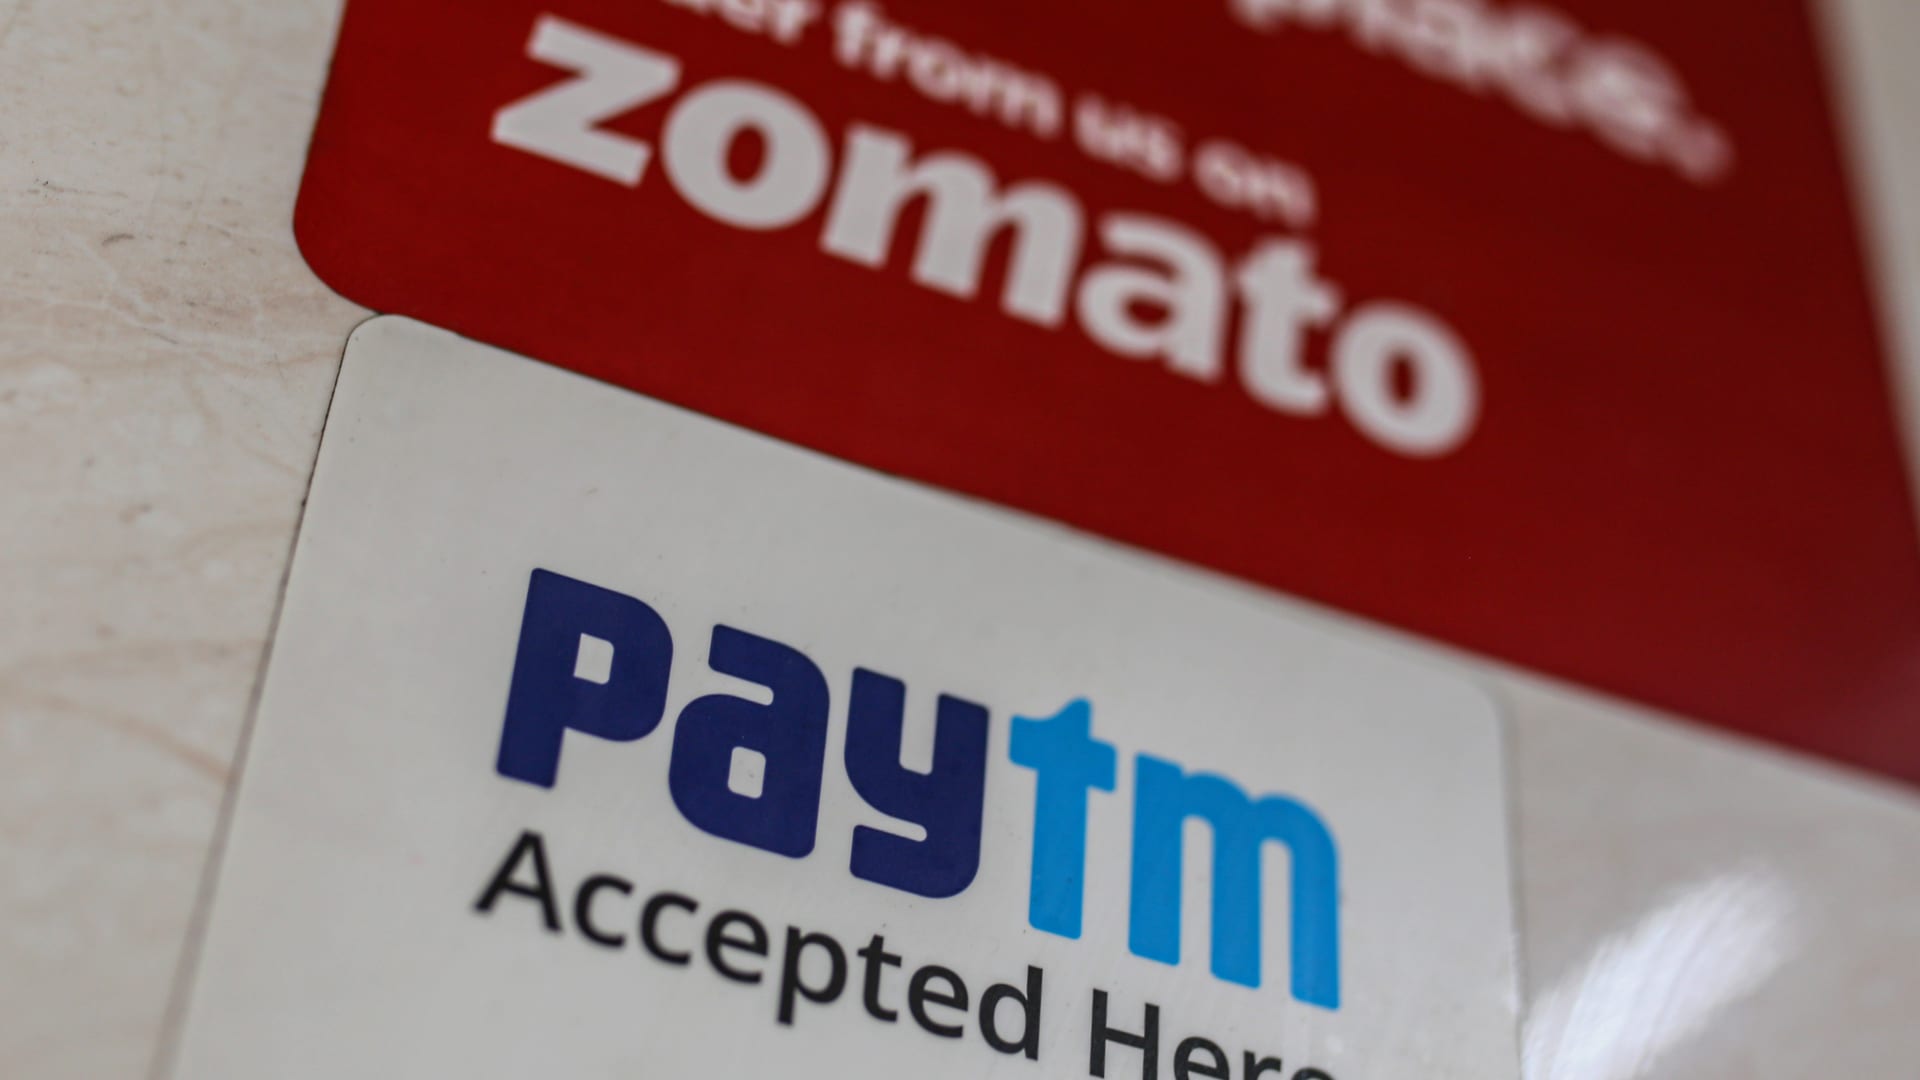 A store advertises the use of the Paytm digital payment system and the Zomato food delivery app in Mumbai, India, on Saturday, July 17, 2021.